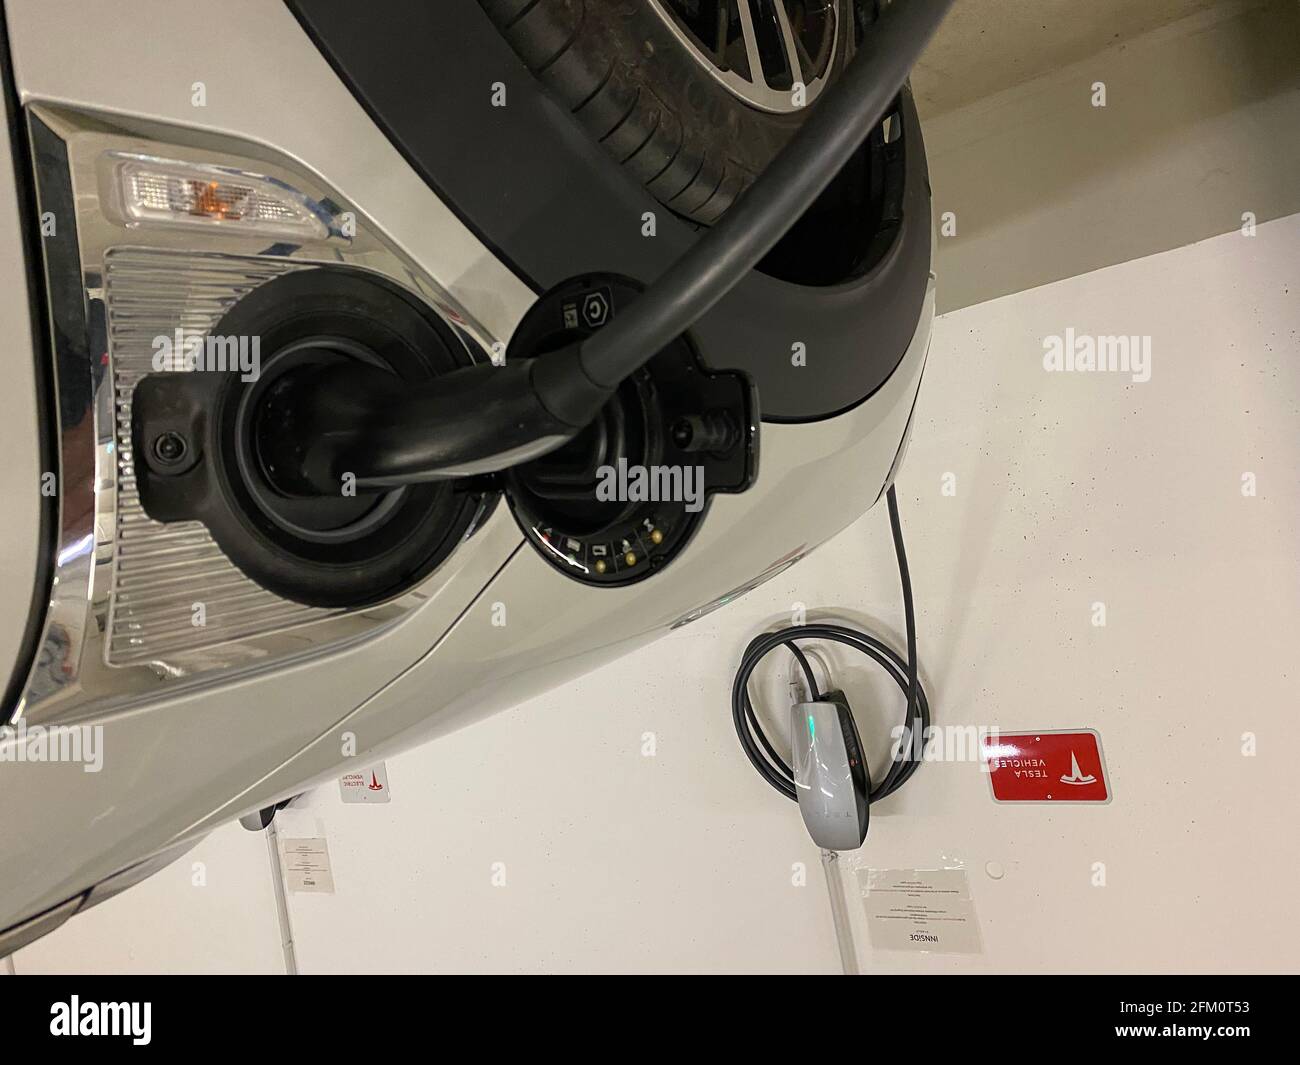 Munich, Germany. 05th May, 2021. Wallbox for charging an e-car, electric  car, e-car is charged in a parking garage, charging plug, charging cable,  box, charger hangs on the wall, charging column, charging